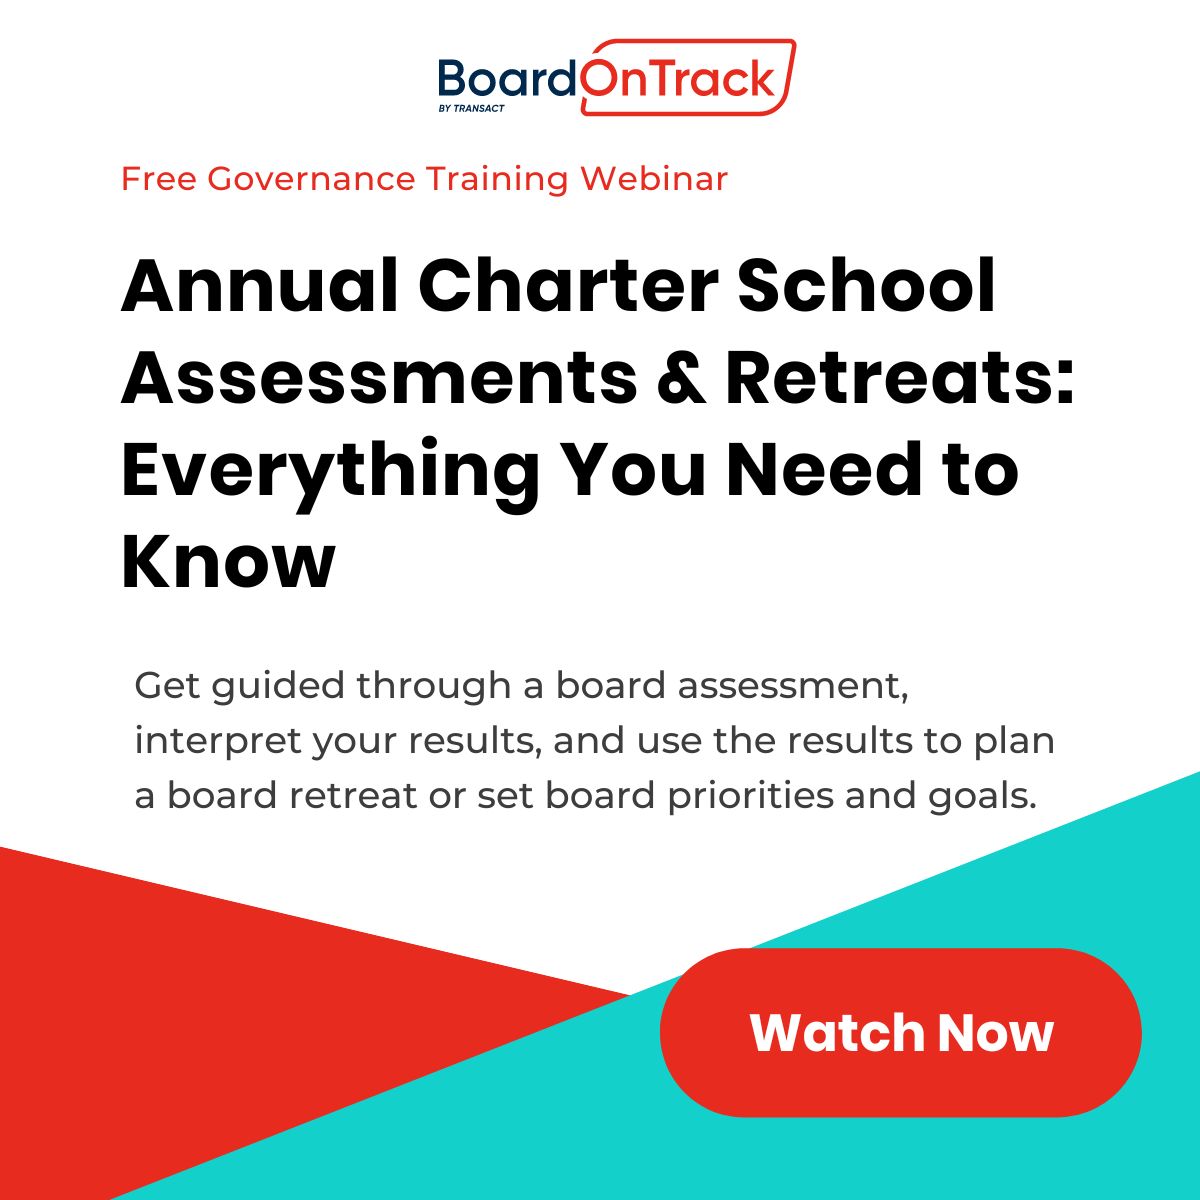 Annual Charter School Assessments & Retreats: Everything You Need to Know